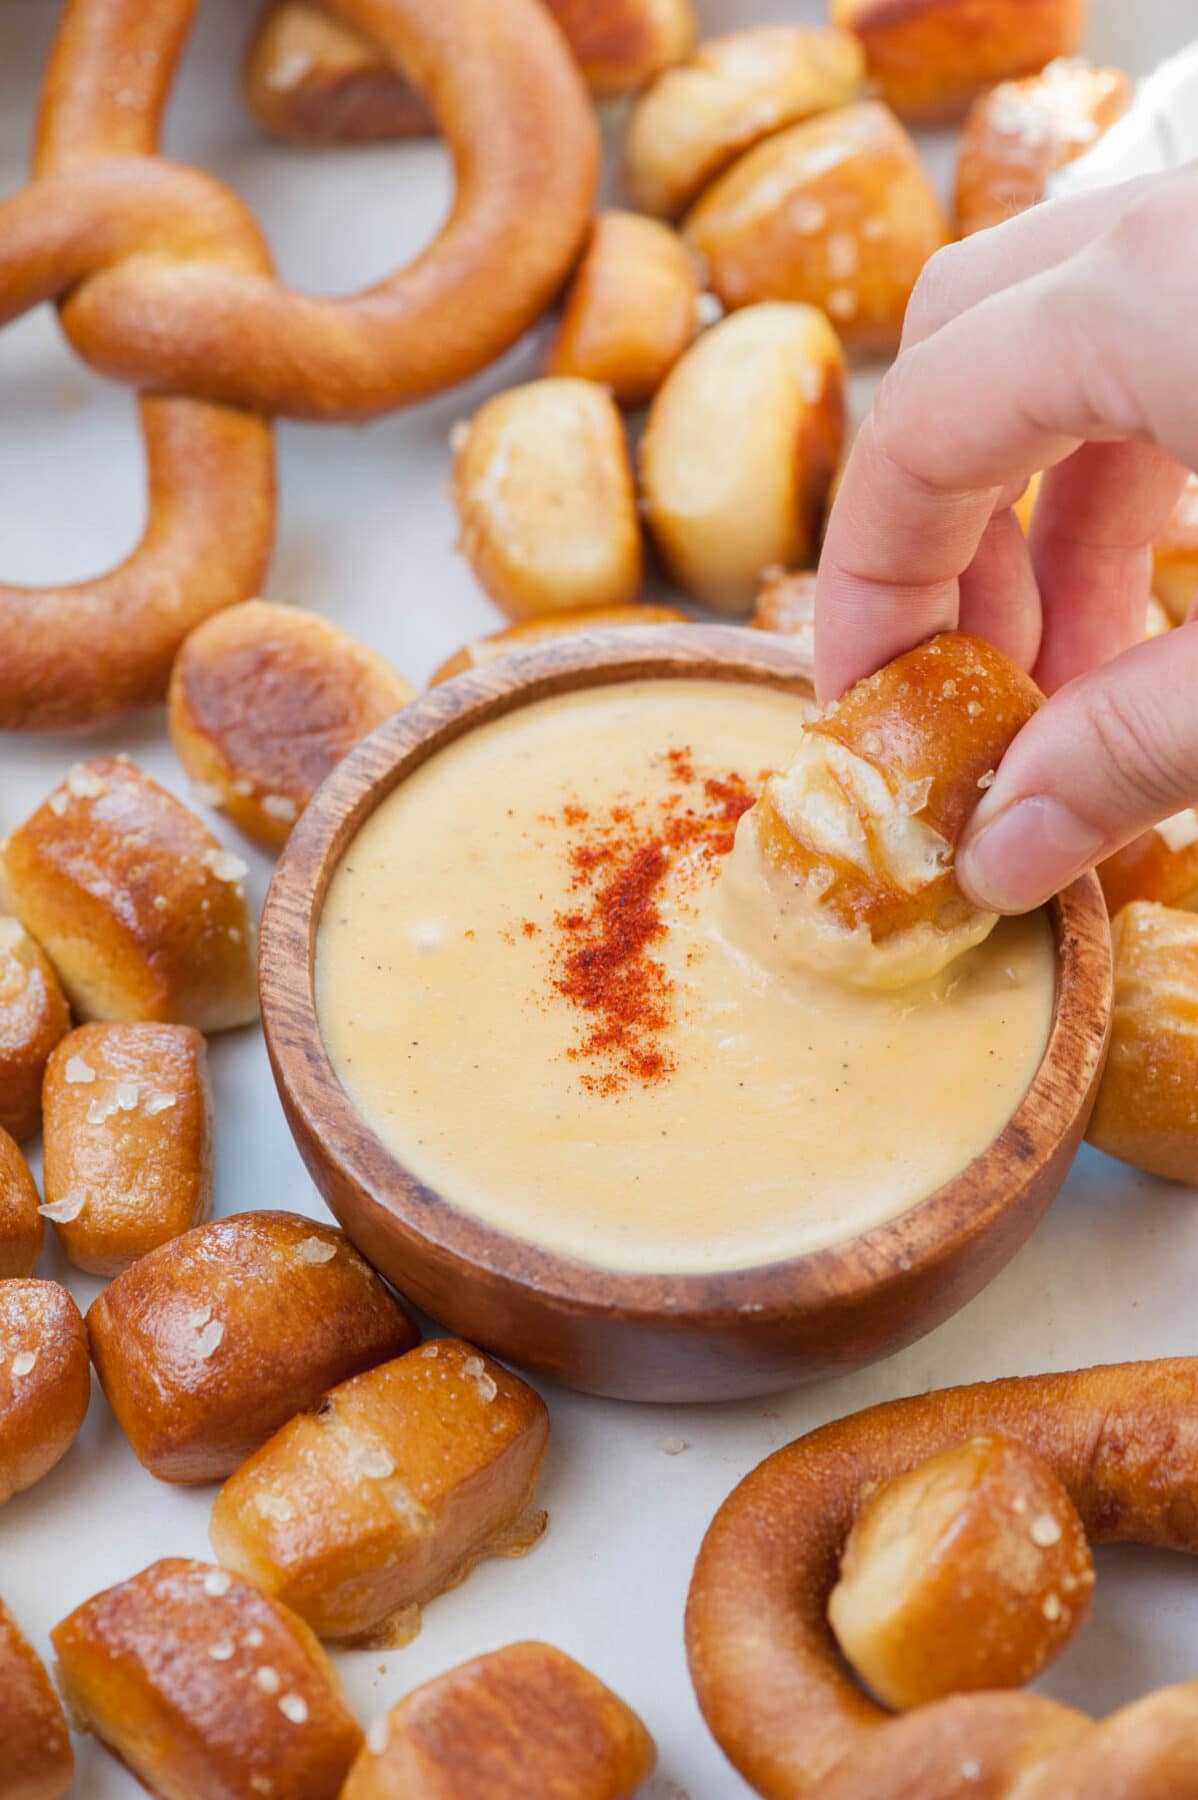 Soft pretzel bite is being dipped in a cheese sauce in a brown bowl.. Pretzel bites scattered around.